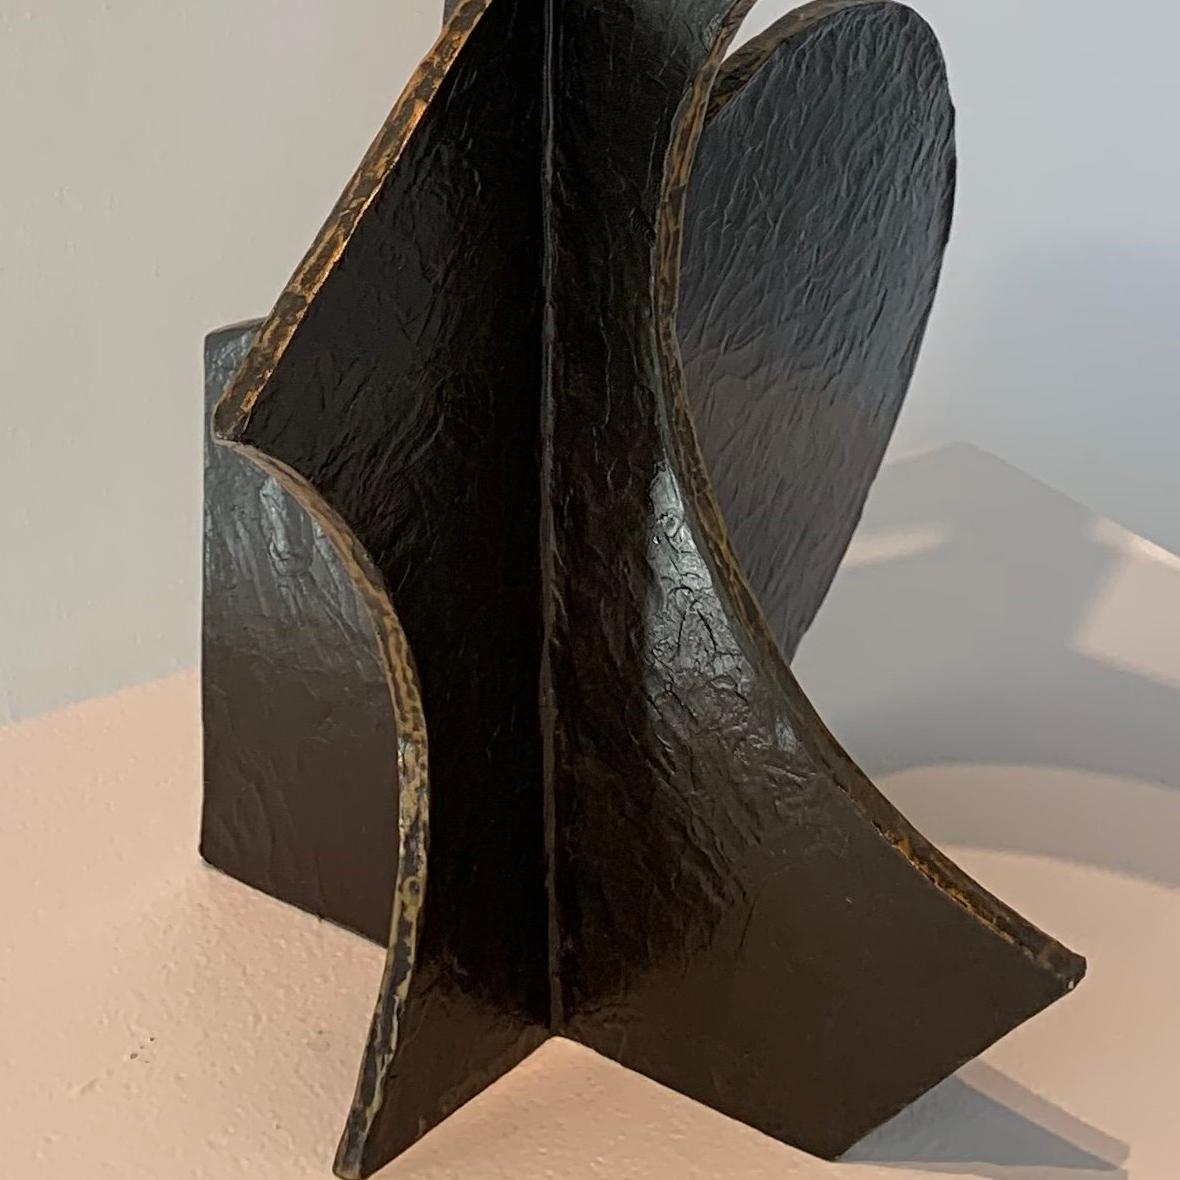 Holistic 12 - Abstract Sculpture by Betty Gold